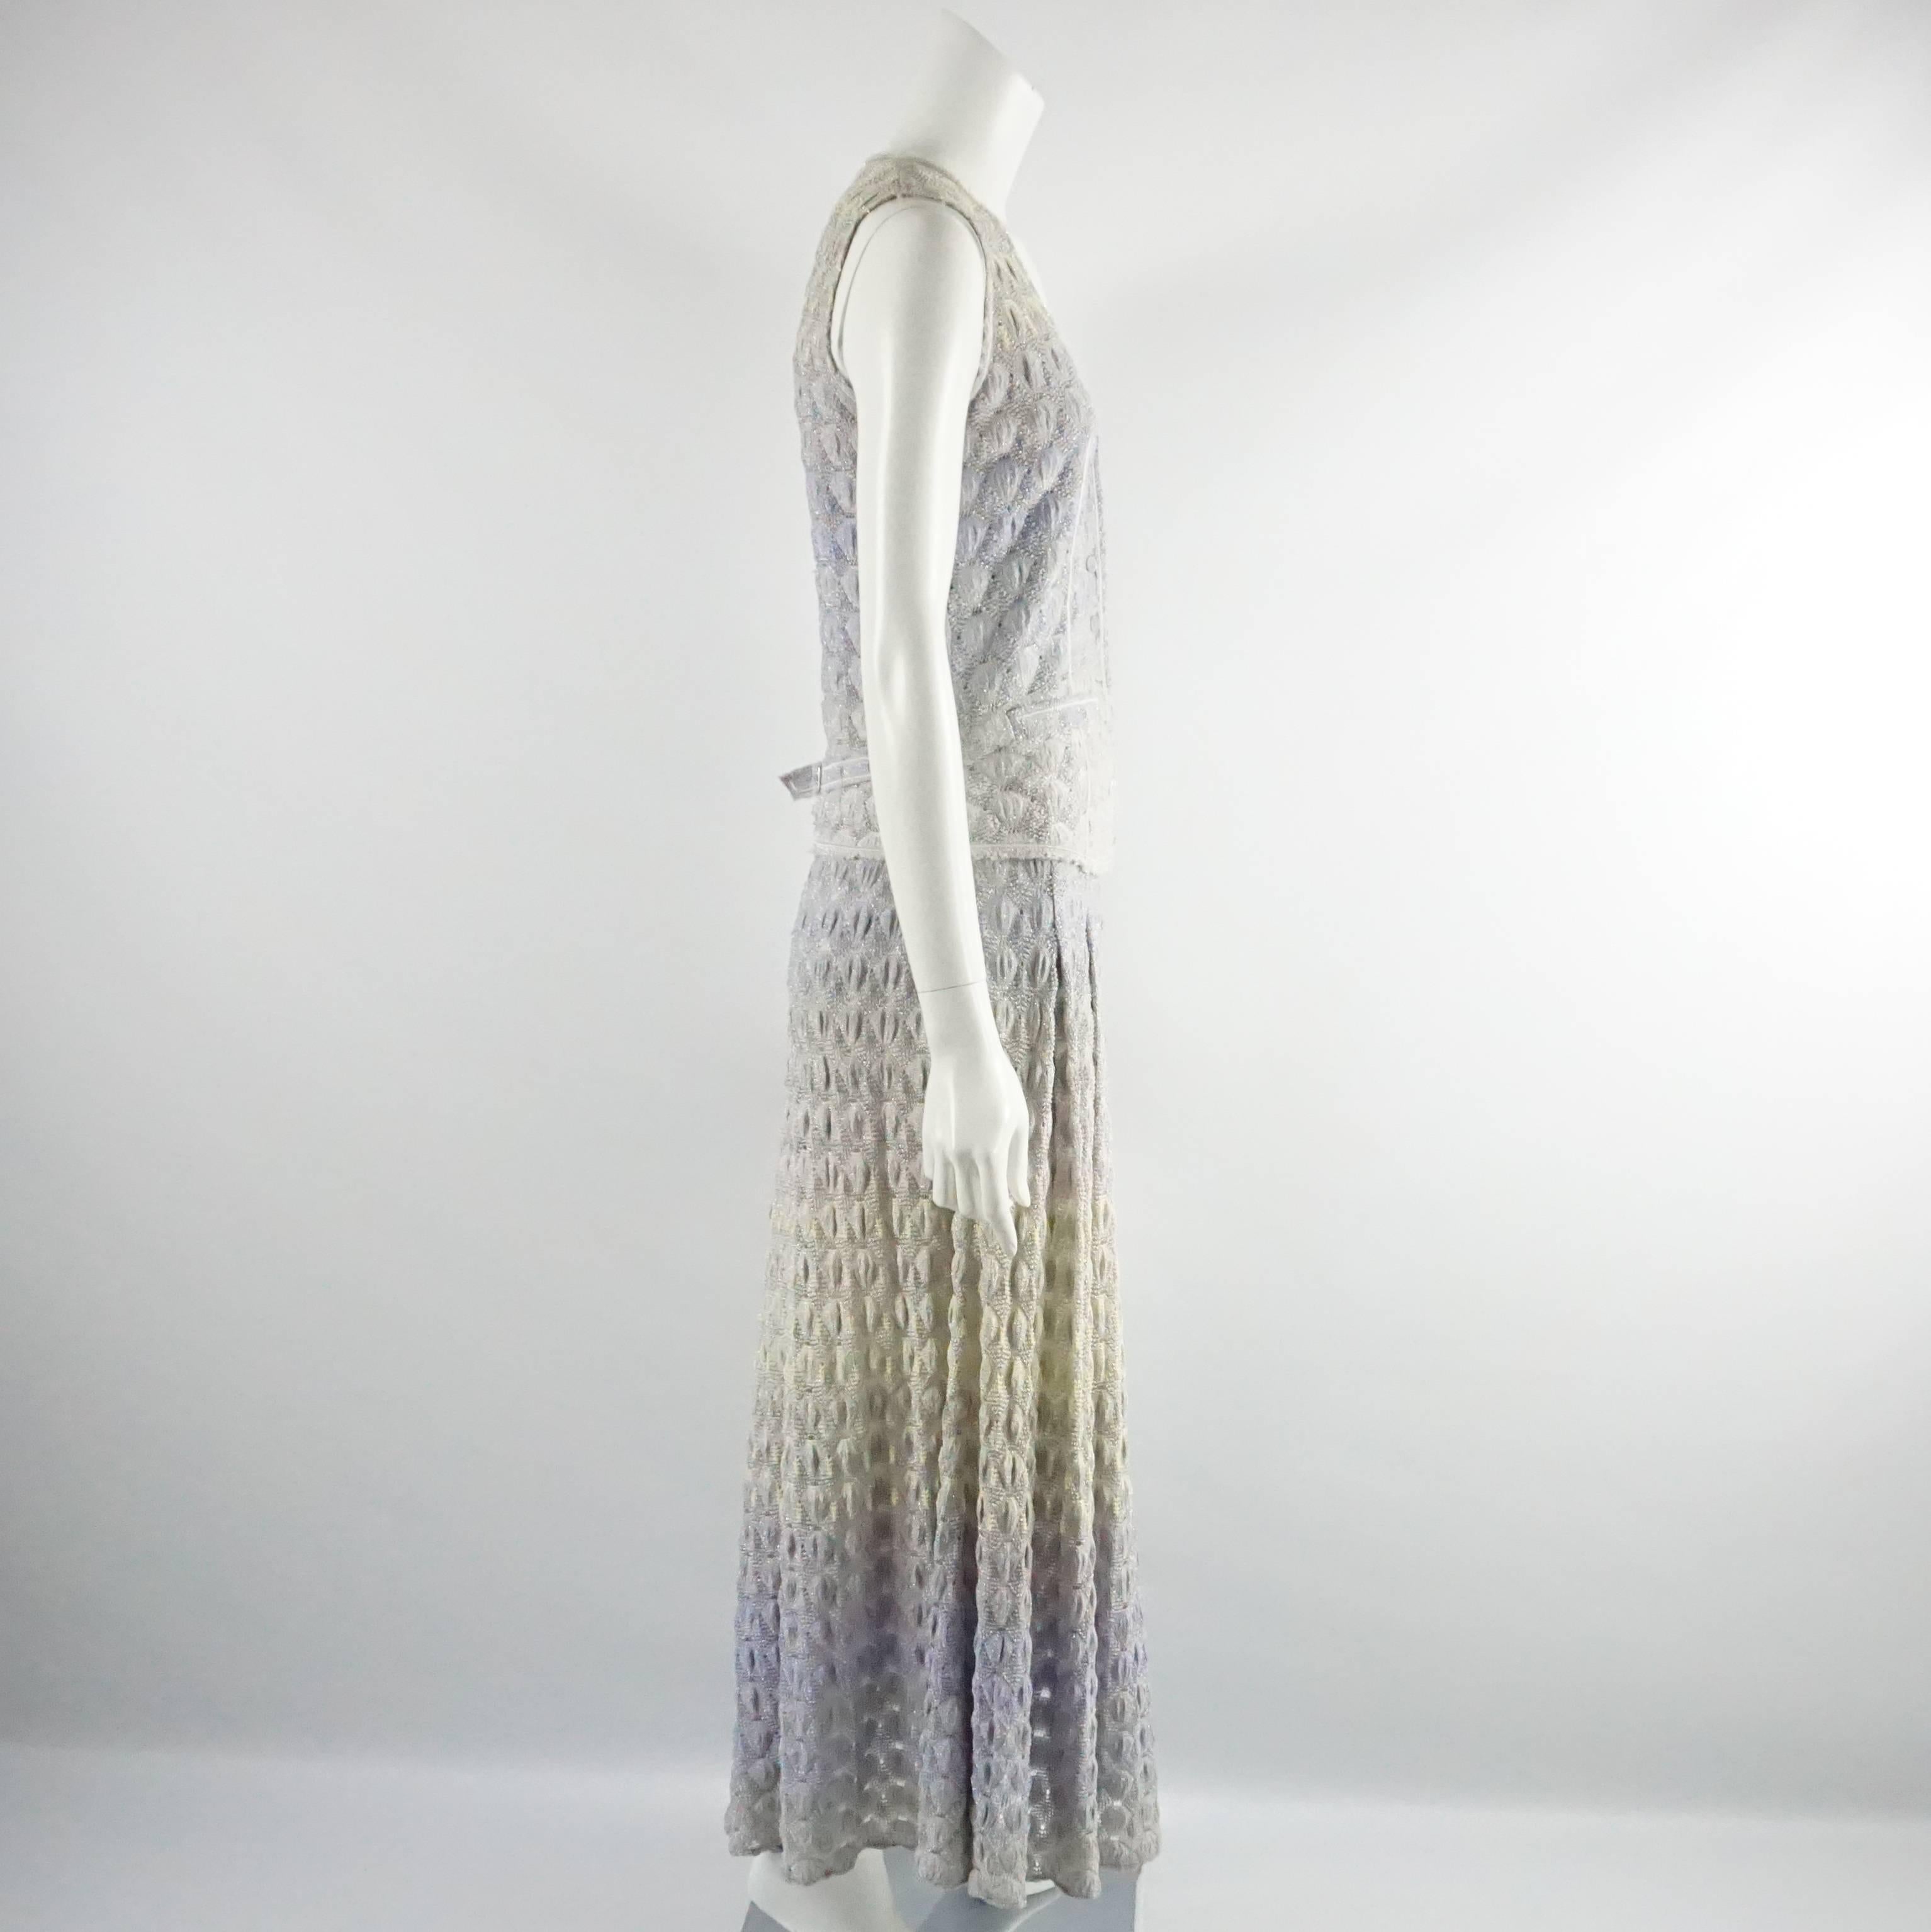 This Missoni knitted maxi dress is lavender, silver, and yellow. It has a sleeveless design, buttons down the front, side pockets, and a pleated skirt. This dress is in excellent condition. Size 40. 

Measurements
Bust: 34 in.
Waist: 30-32 in.
Hips: